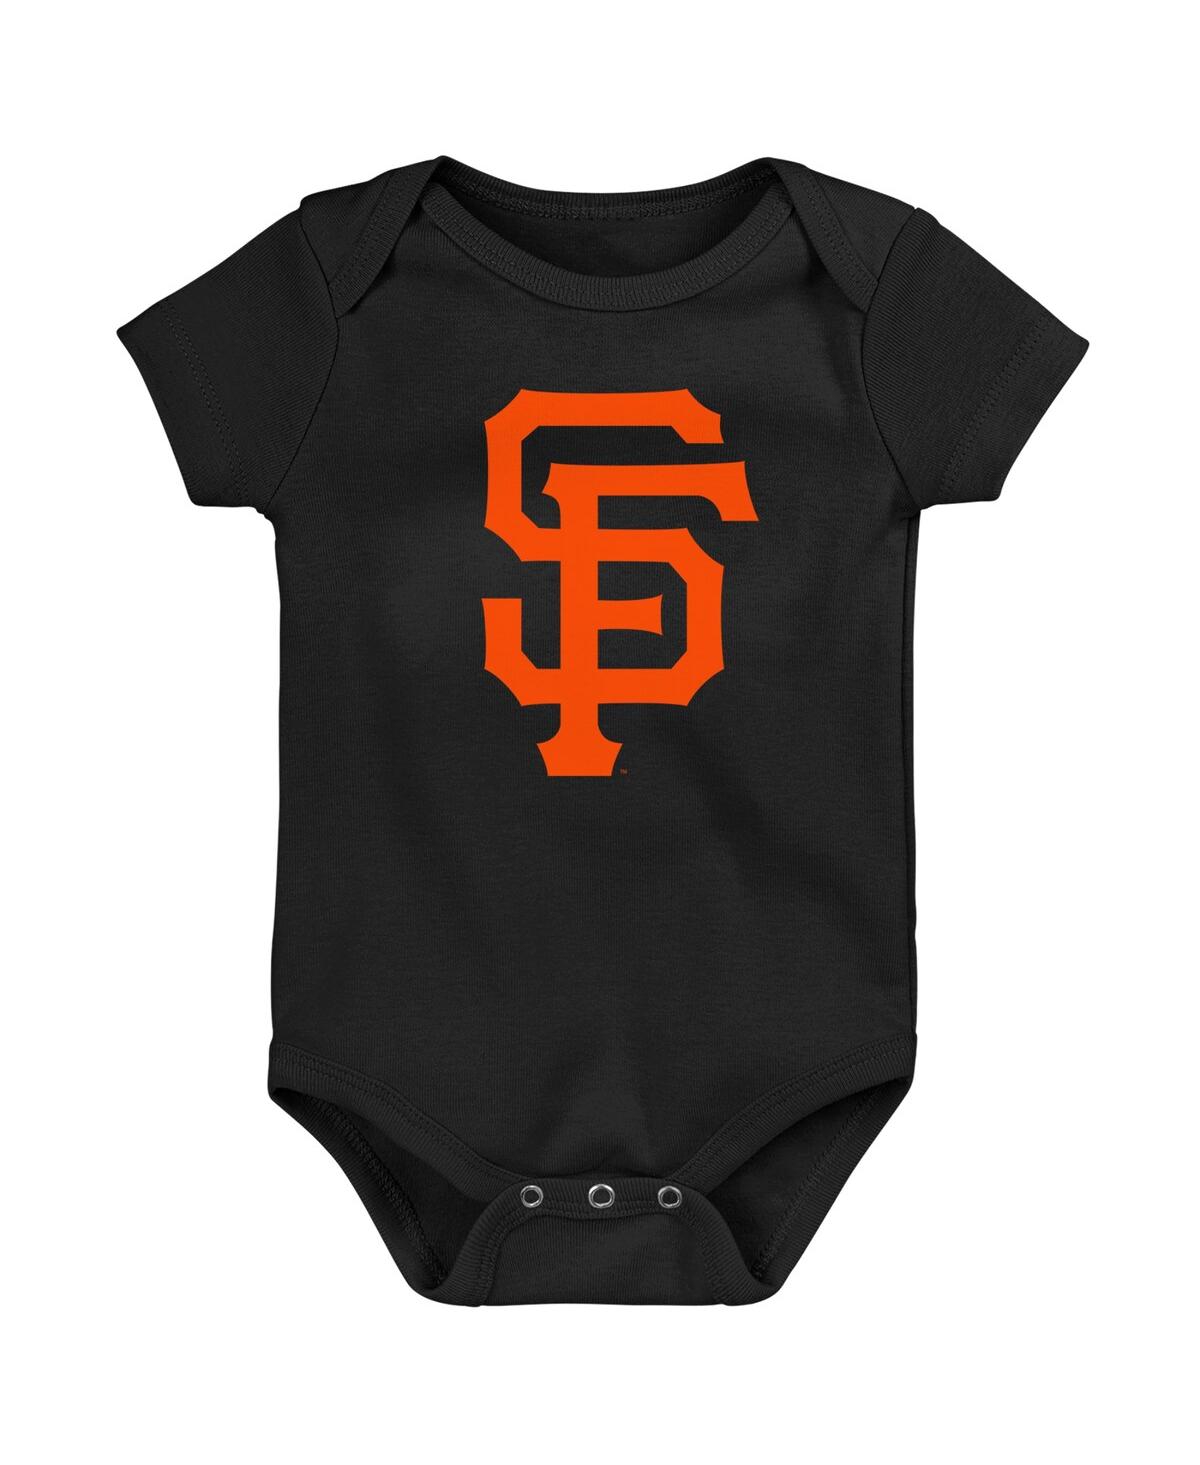 Outerstuff Babies' Newborn And Infant Boys And Girls Black San Francisco Giants Primary Team Logo Bodysuit